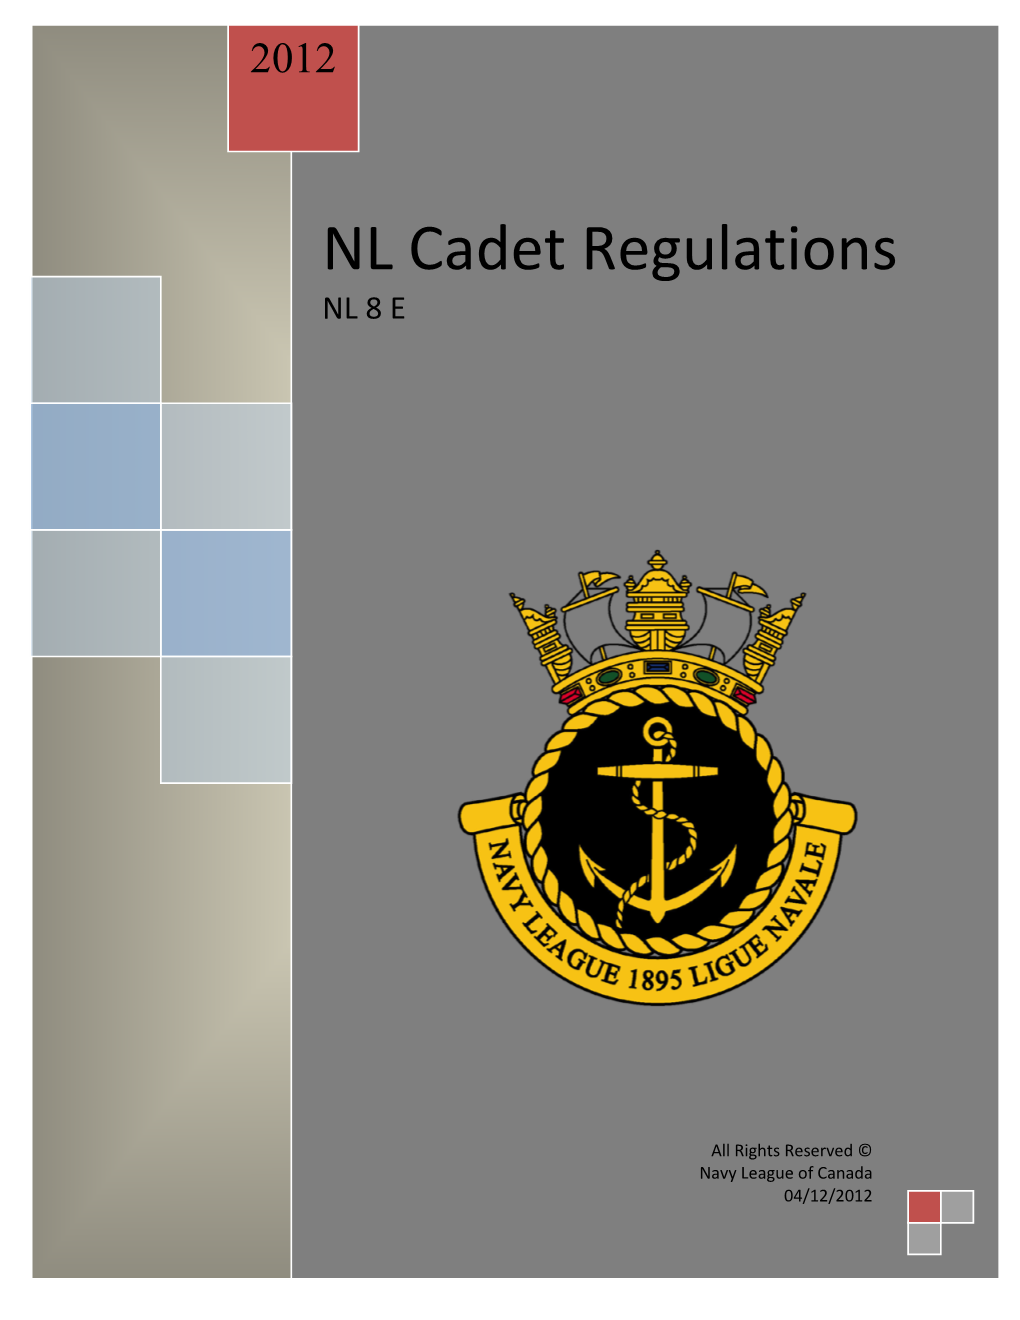 NL(8)E – 04 December 2012 I the Navy League of Canada APPLICANT ______19 DECLINED ______19 CHAPTER 2 DIVISION SCREENING CO-ORDINATOR ______19